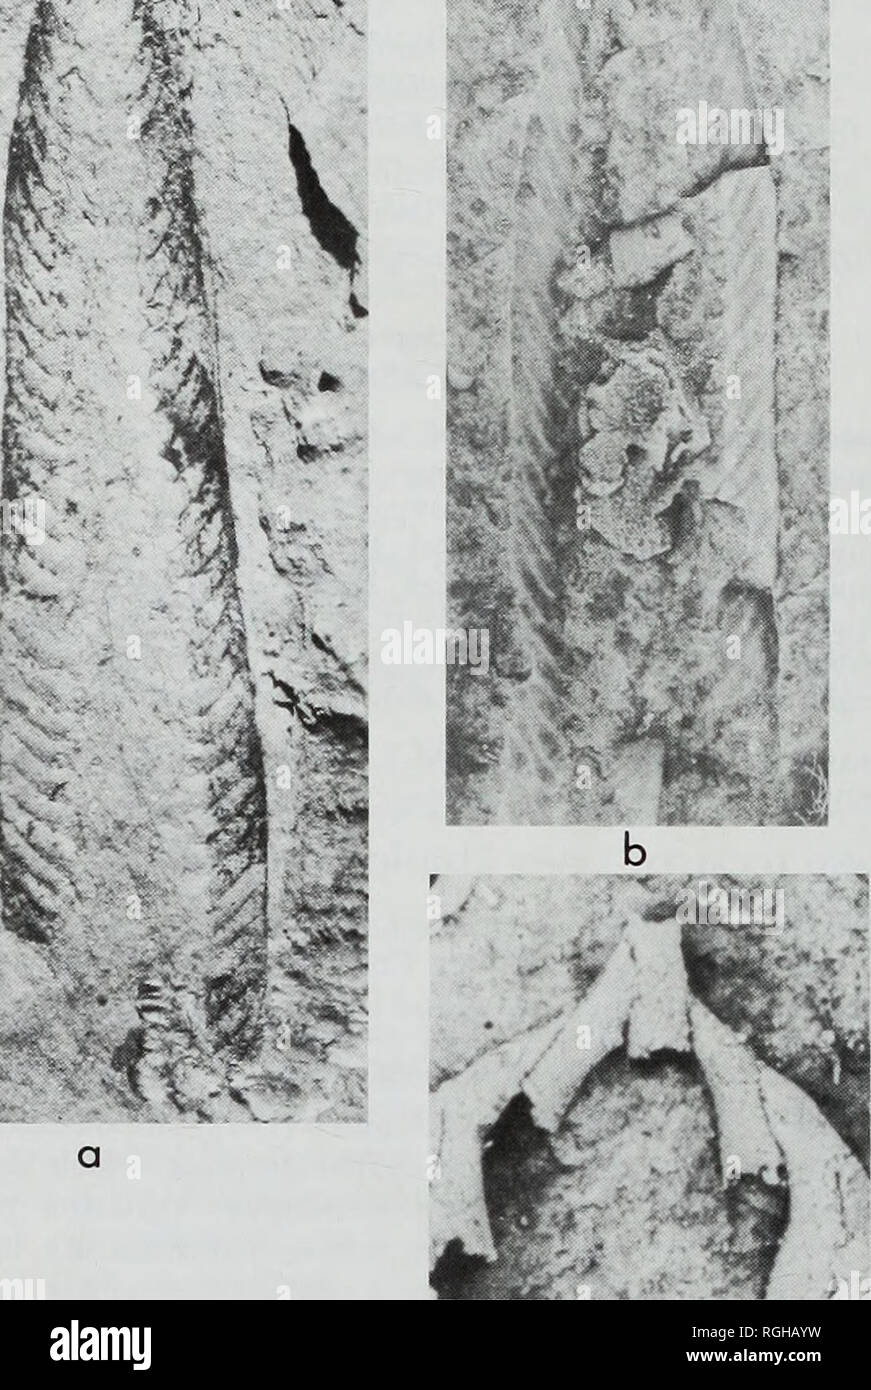 . Bulletin of the British Museum (Natural History), Geology. 256 R. A. FORTEY &amp; R. M. OWENS â¢v- : Â»*** ^ym i1&quot;. ? â Â®r&quot;1'&quot; Â». Fig. 110 Didymograptus (Didymograptus) spinulosus Perner 1895. a, early Llanvirn, D. artus Biozone, Llanfallteg Formation, loc. 55, whole rhabdosome, x 4, Q5163; b, Lower Llanvirn, cast of holotype, C. retroflexus Biozone, Sarka Formation, Osek, Bohemia, x 4, Nat. Mus. Prague NM-L 7564 (cast supplied by Dr R. Prokop); c, as last, latex cast of proximal end (showing probable isograptid development in obverse view, sicula incomplete), x 15, Nat. Mus Stock Photo